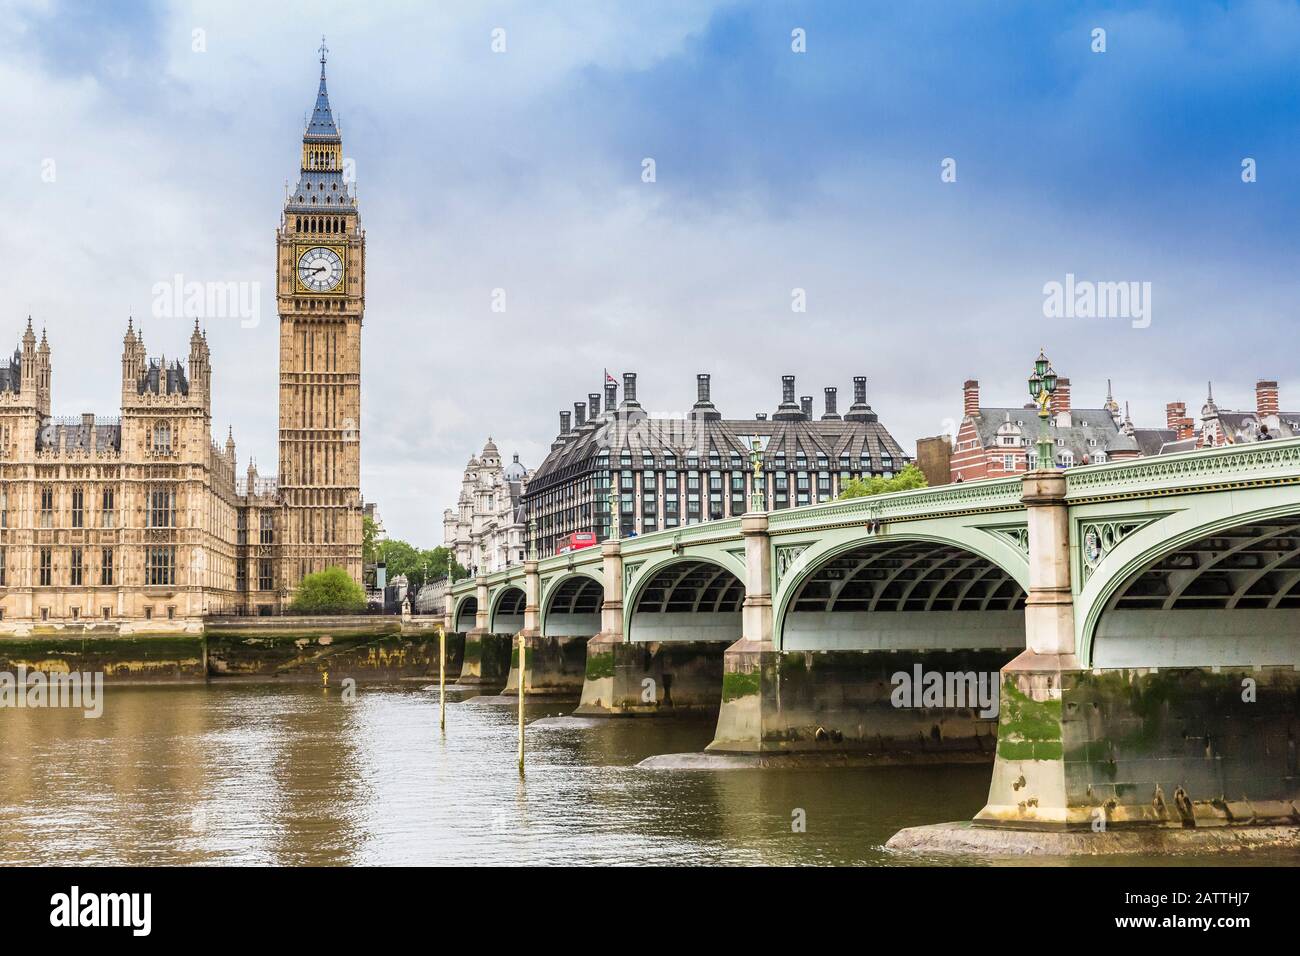 The Palace of Westminster, including the Clock Tower, Big Ben, London, England, United Kingdom Stock Photo